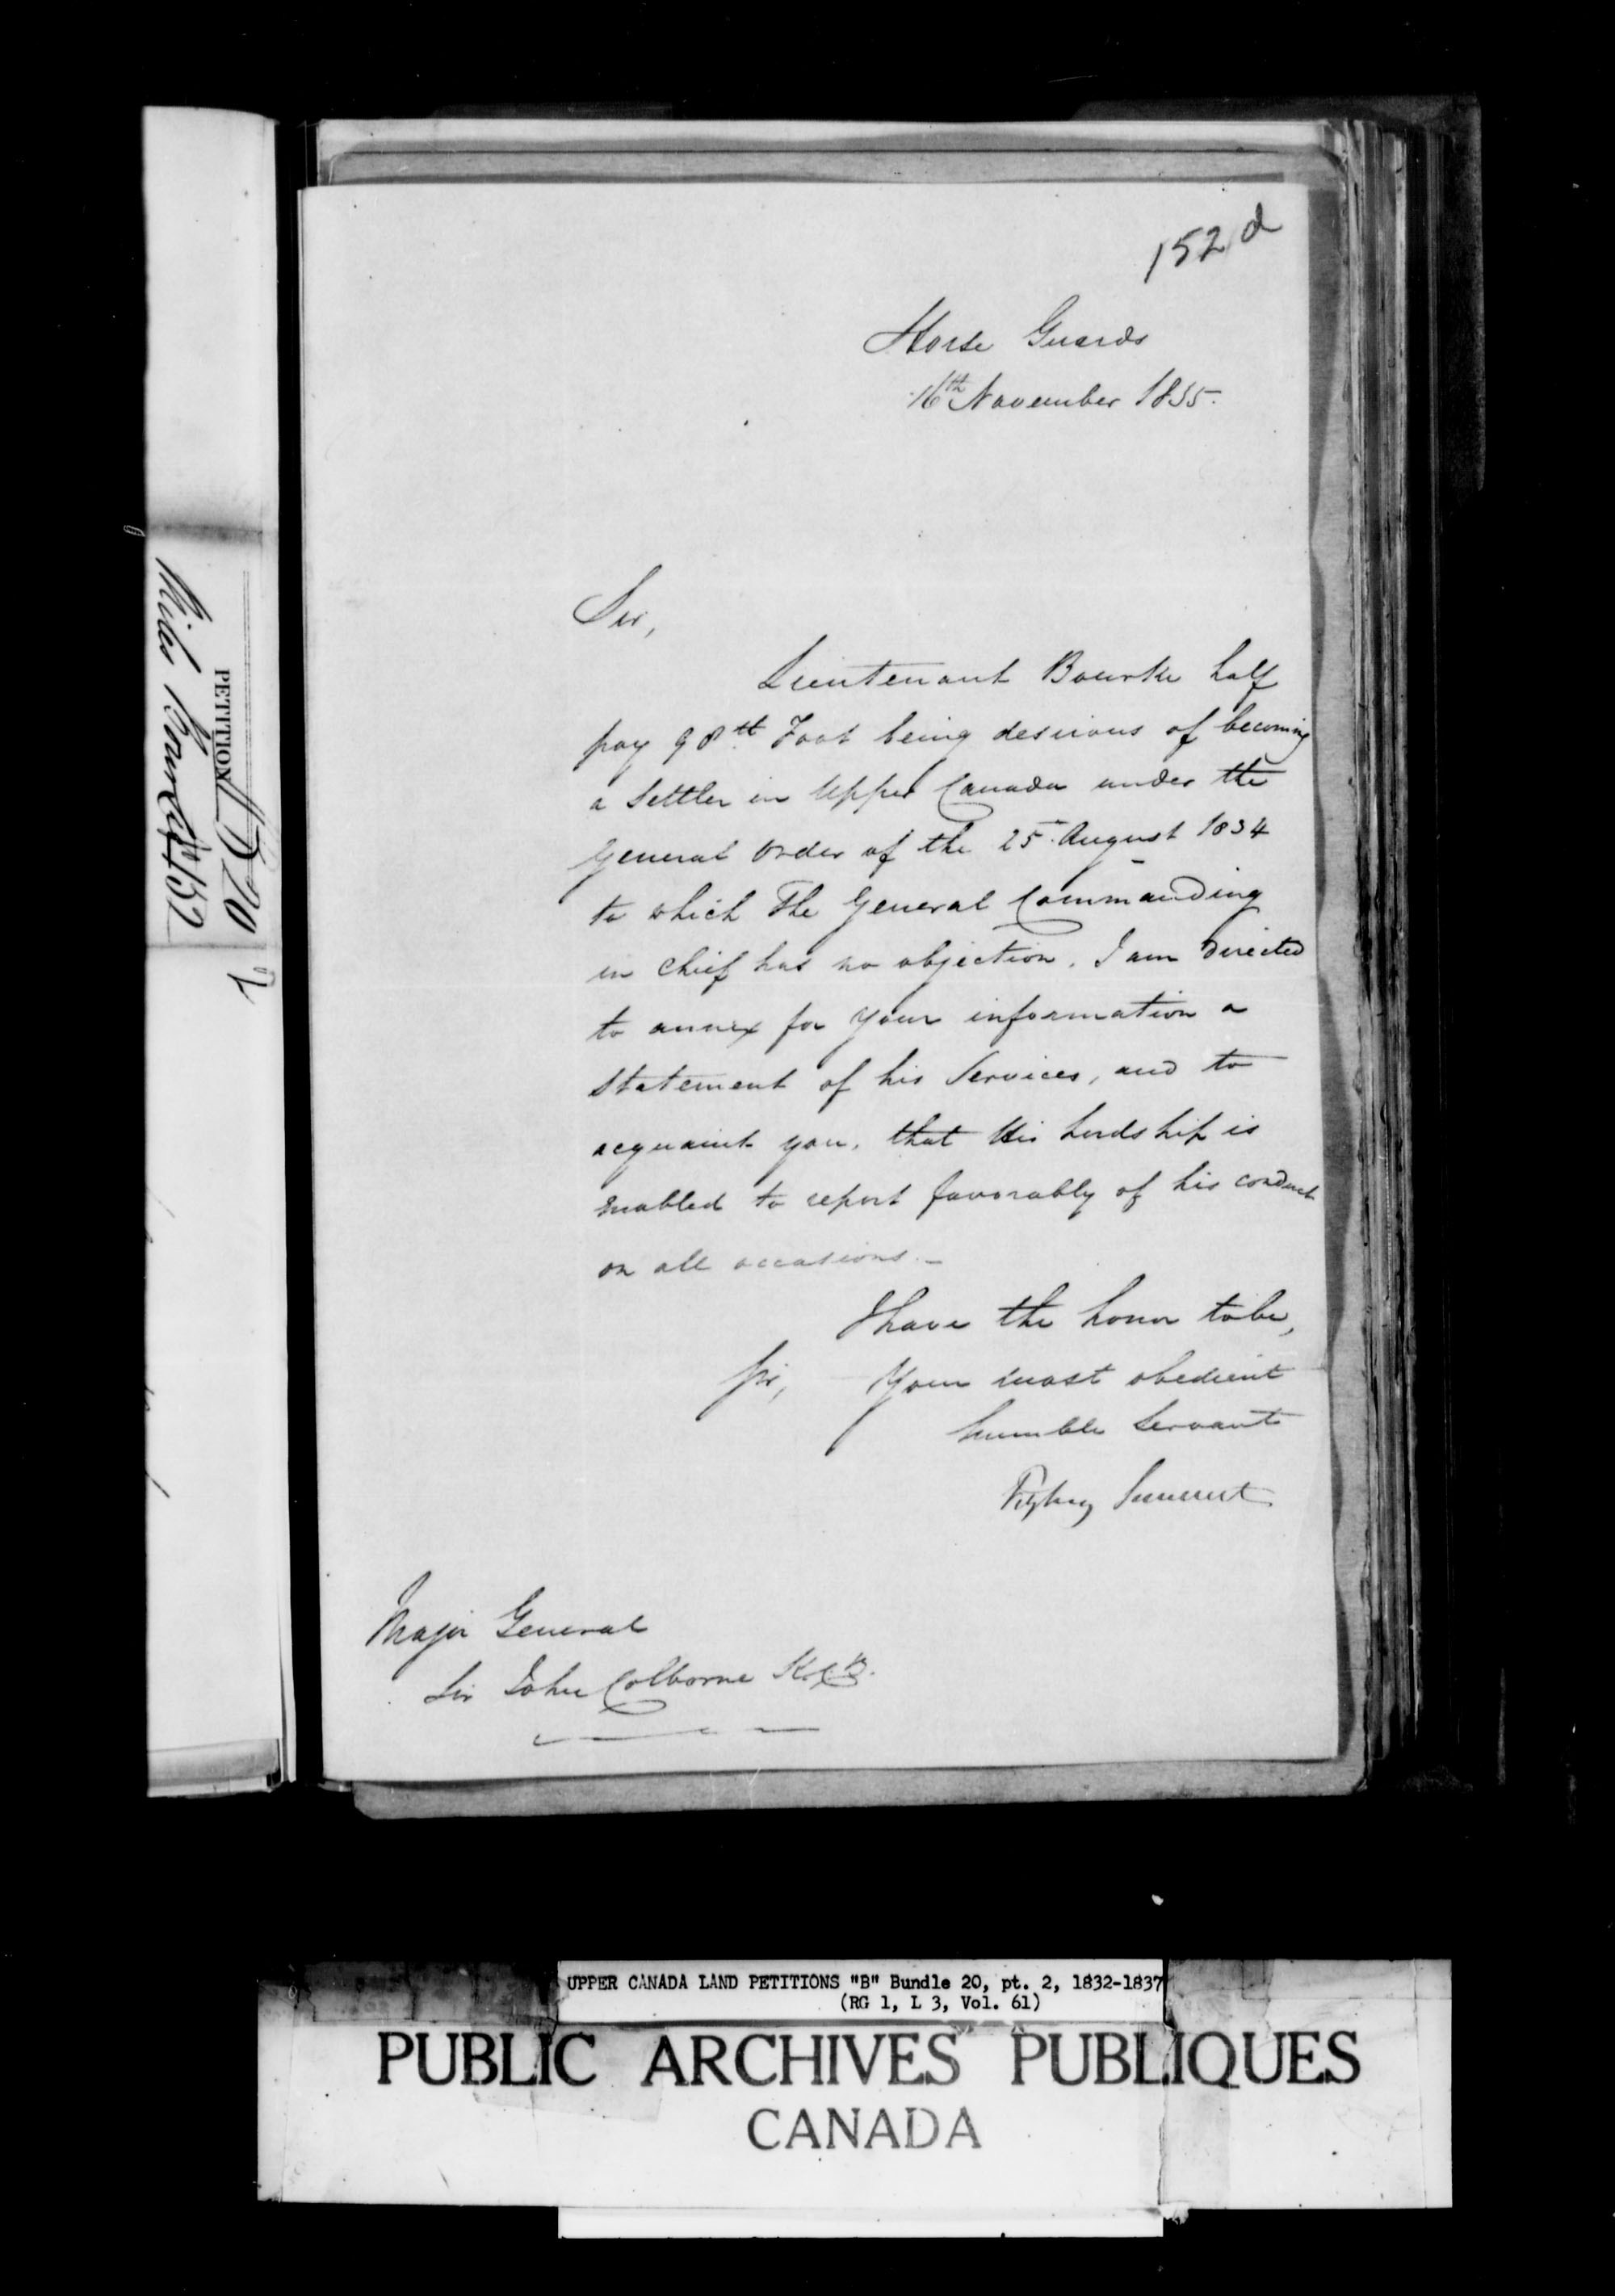 Title: Upper Canada Land Petitions (1763-1865) - Mikan Number: 205131 - Microform: c-1632